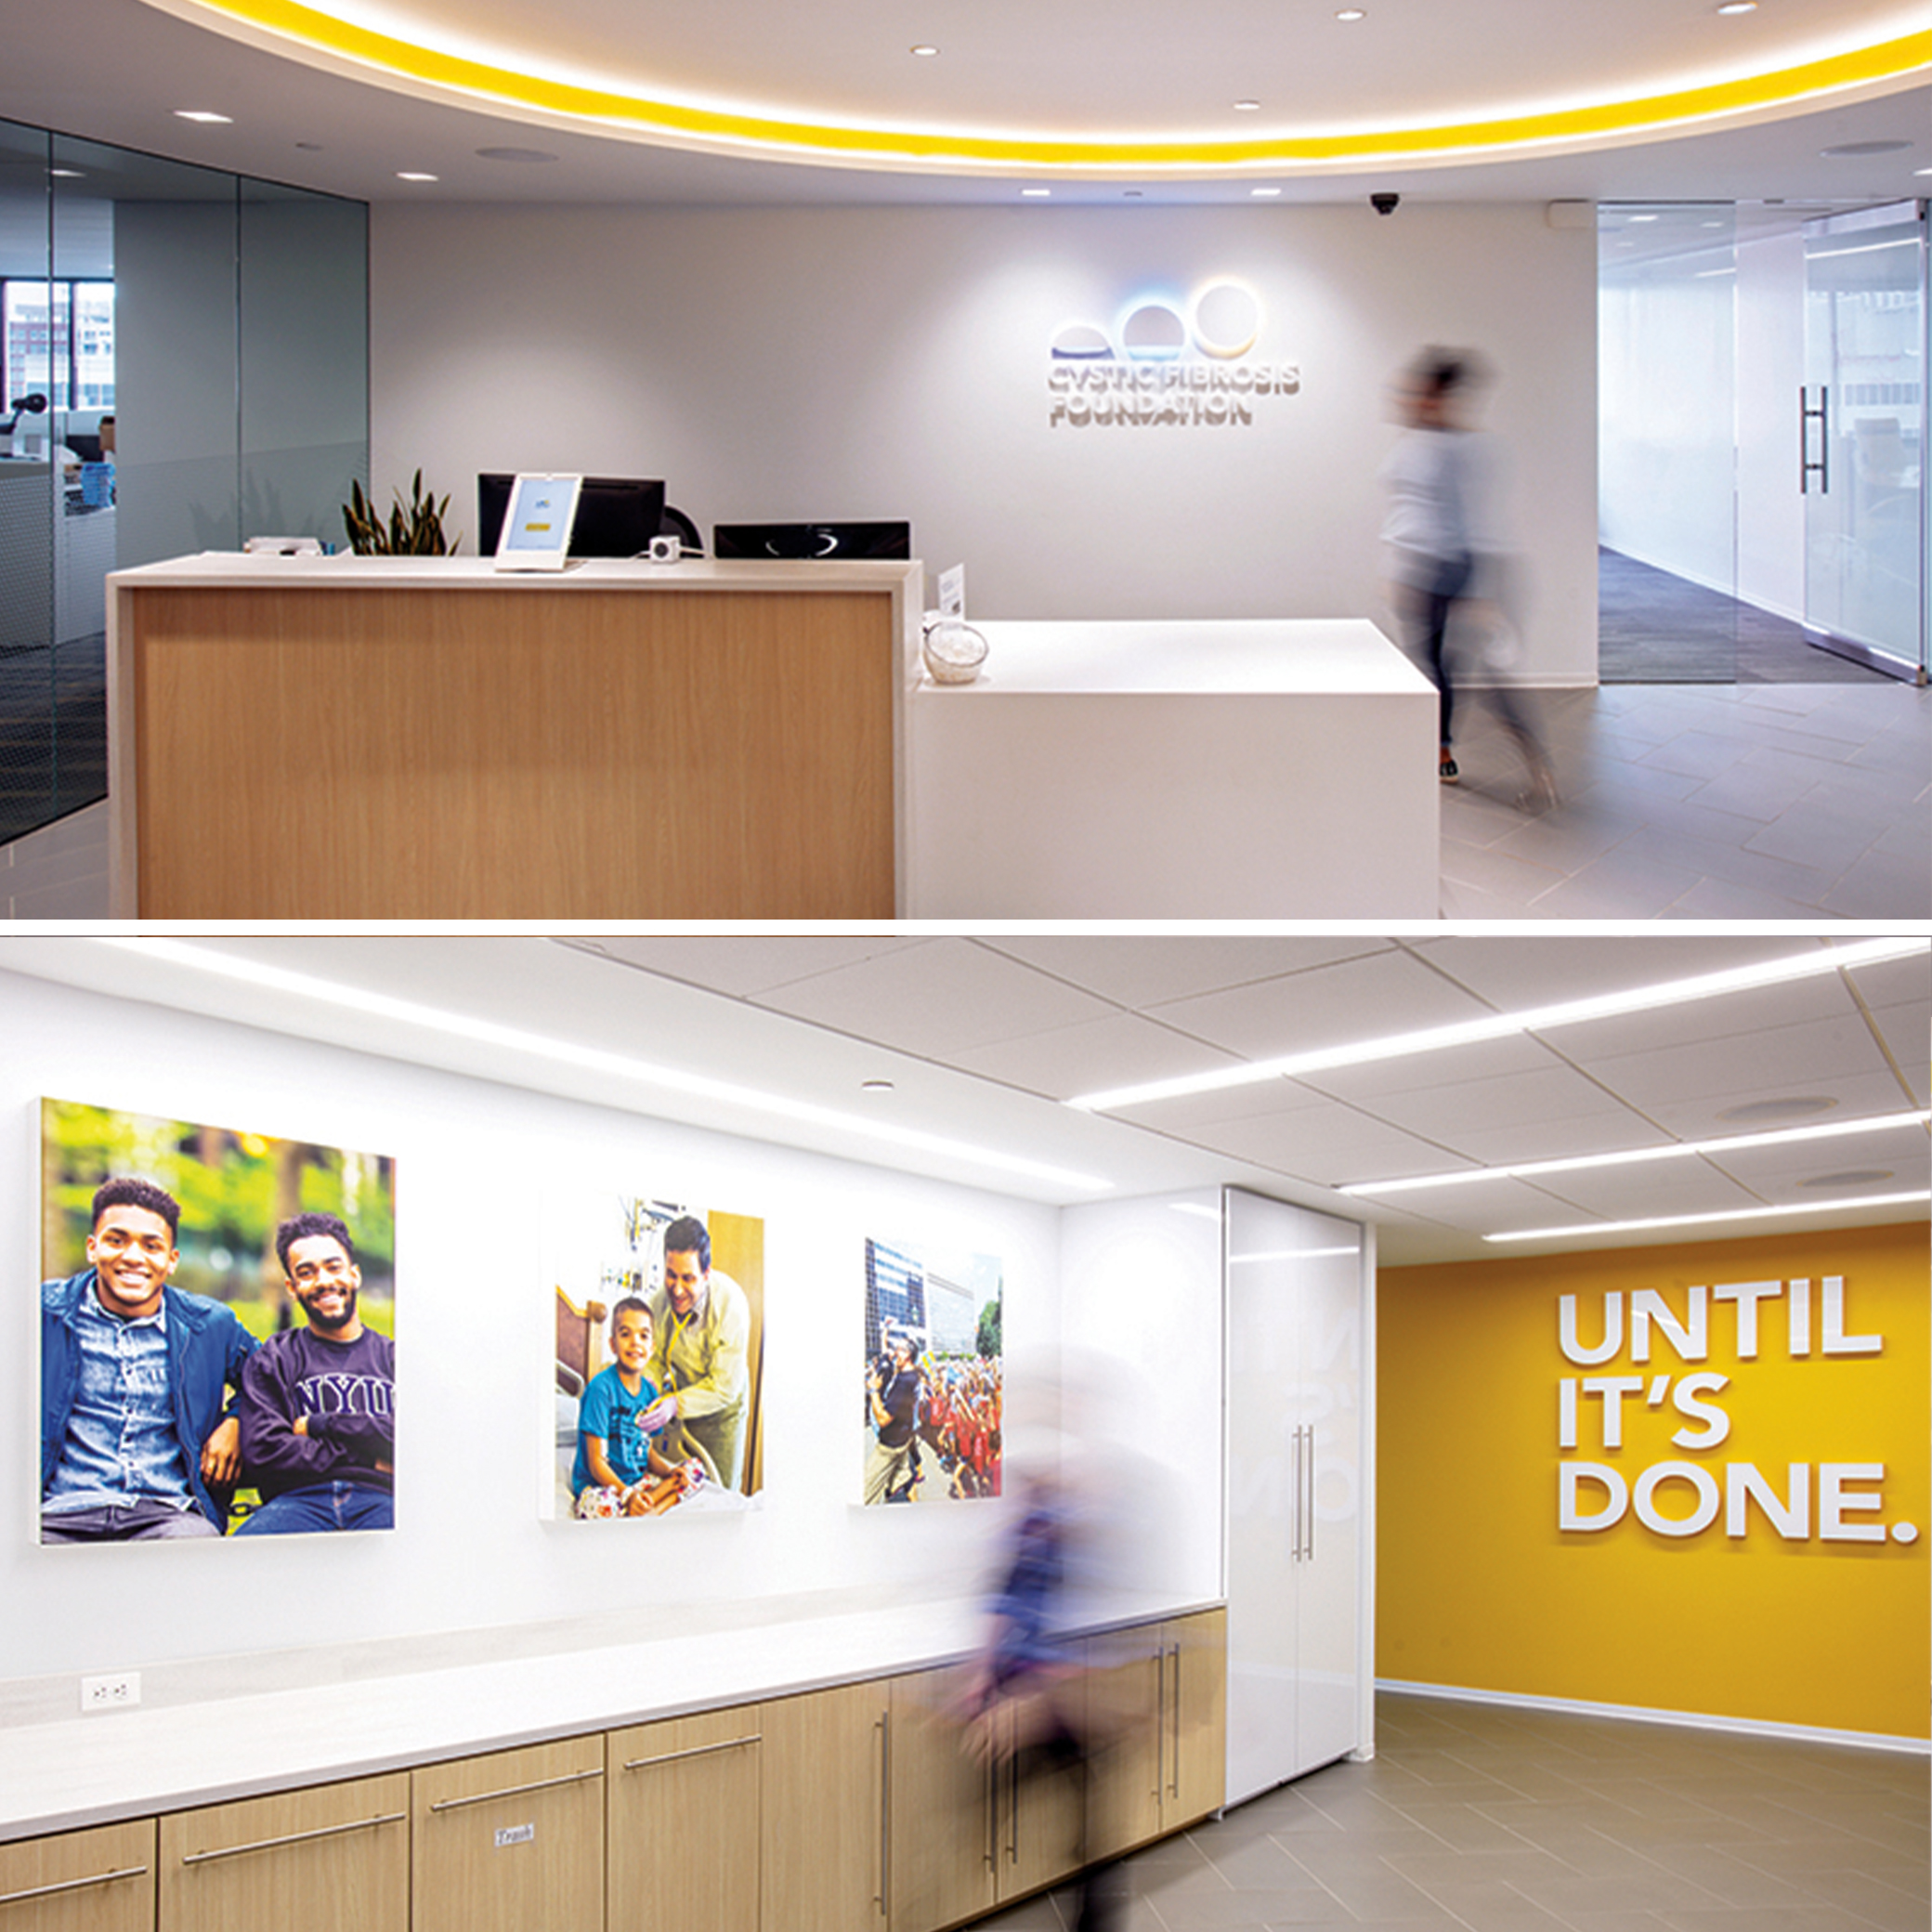 Photos of conference rooms at the Cystic Fibrosis Foundation with interior branded murals and lights. 